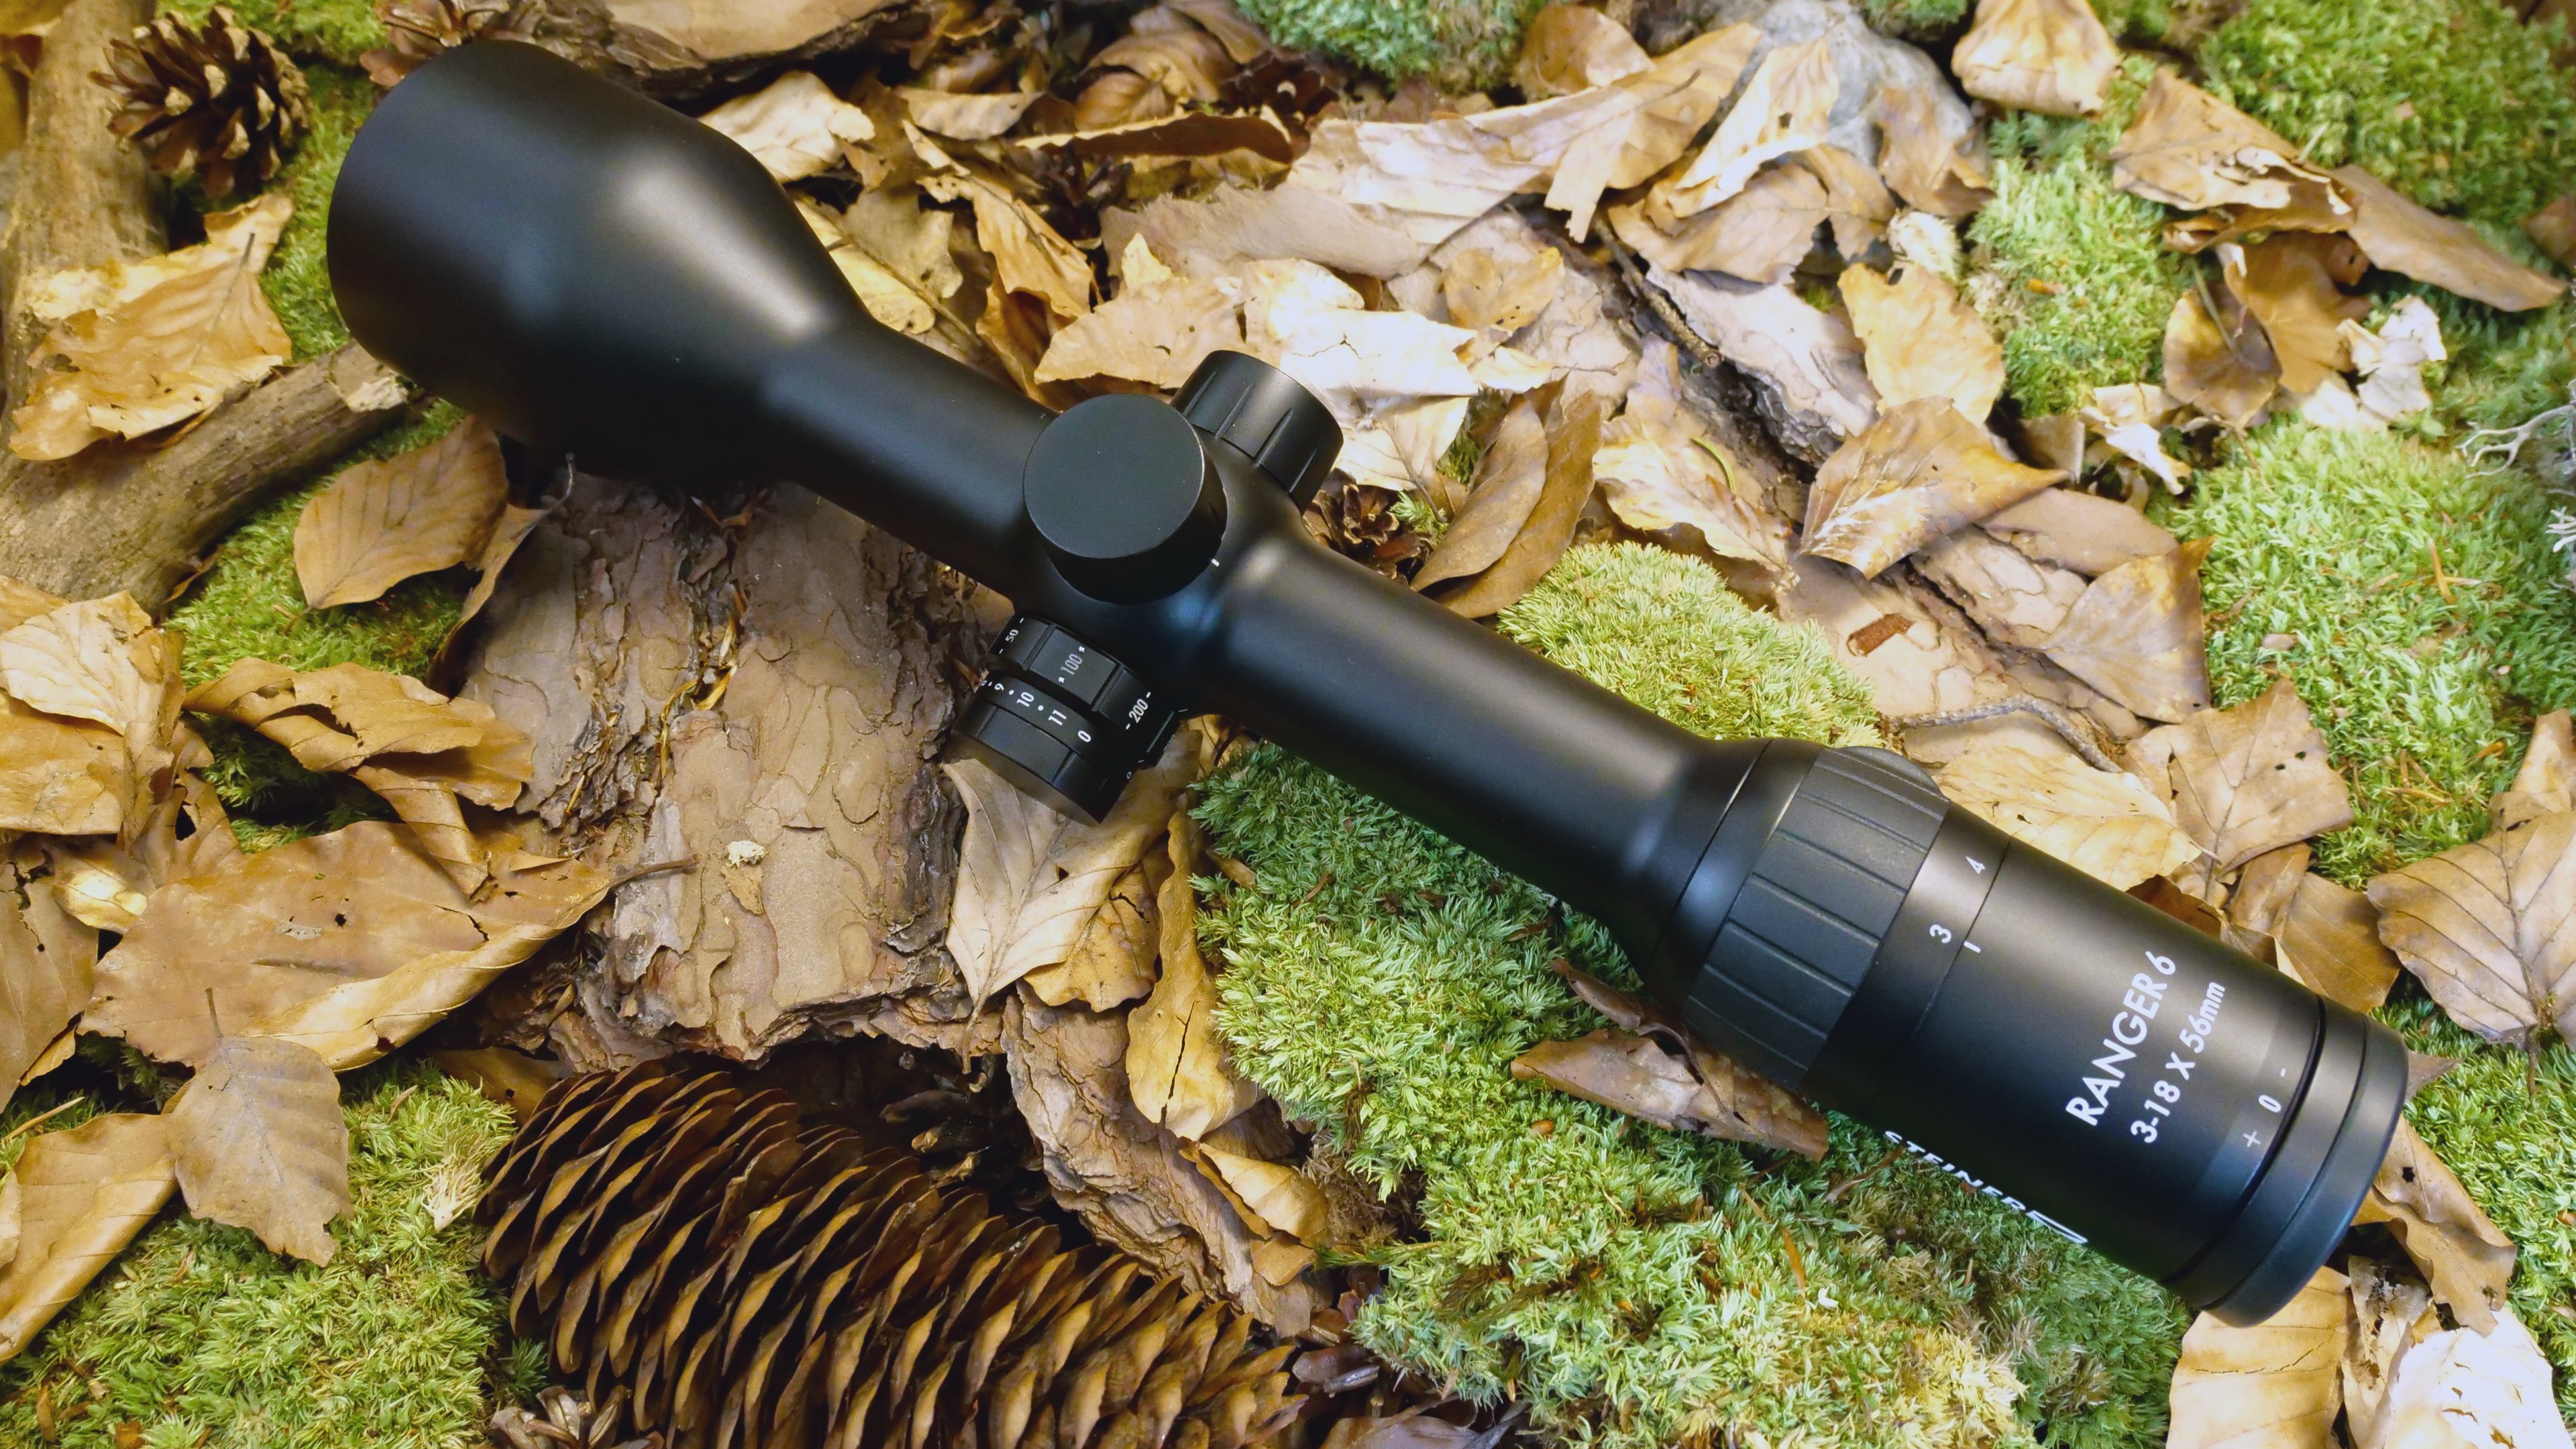 V. Best 56mm Rifle Scope Reviews on the Market